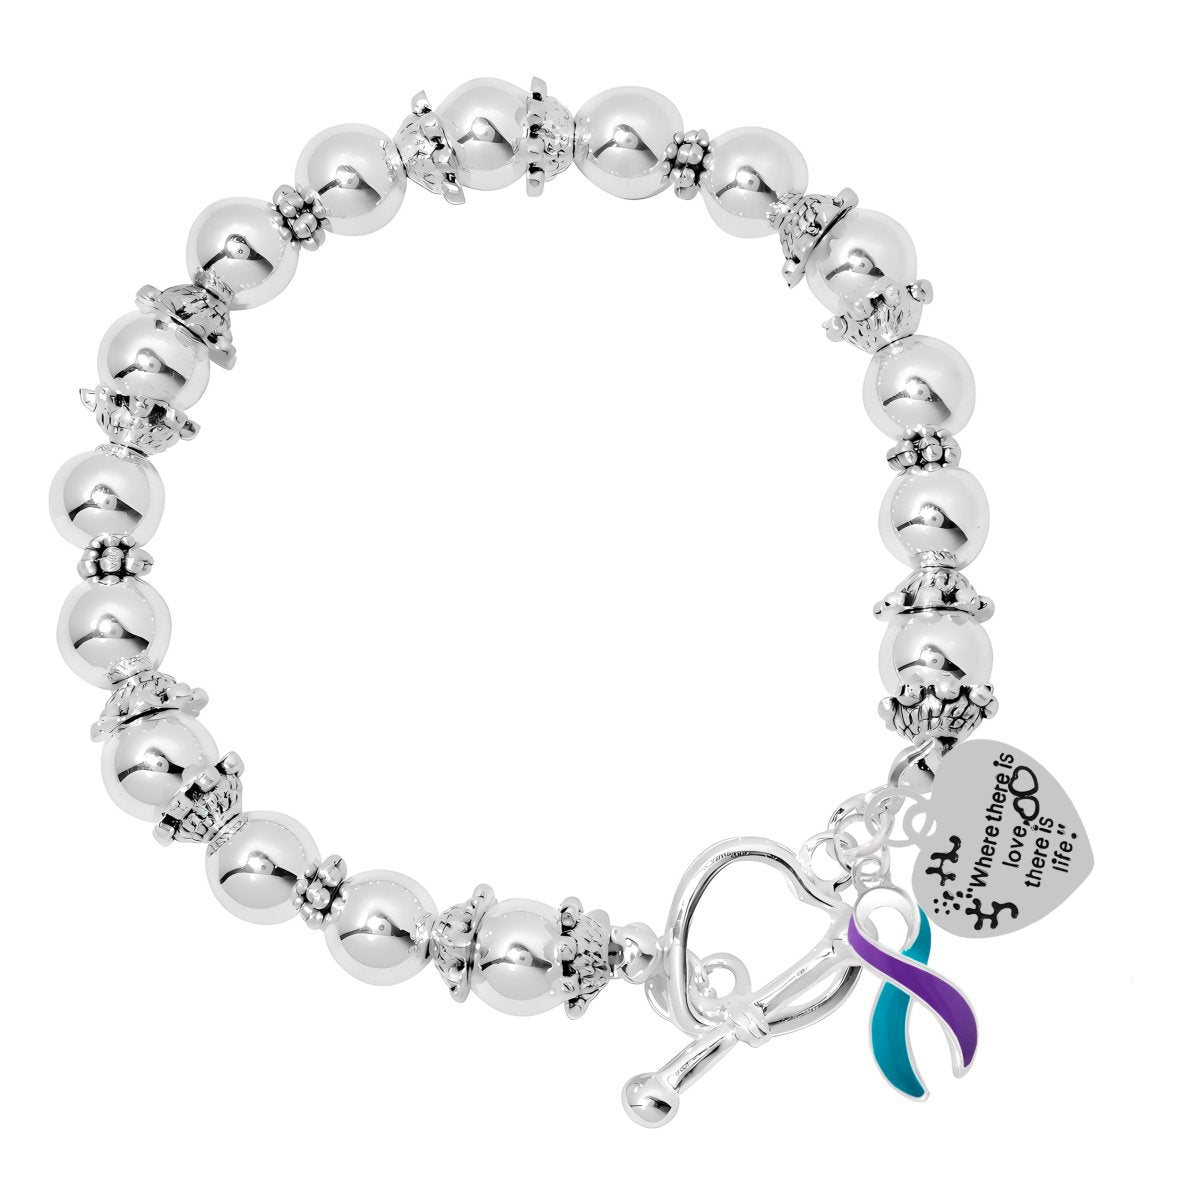 Where There is Love Suicide Prevention Awareness Bracelets - Fundraising For A Cause